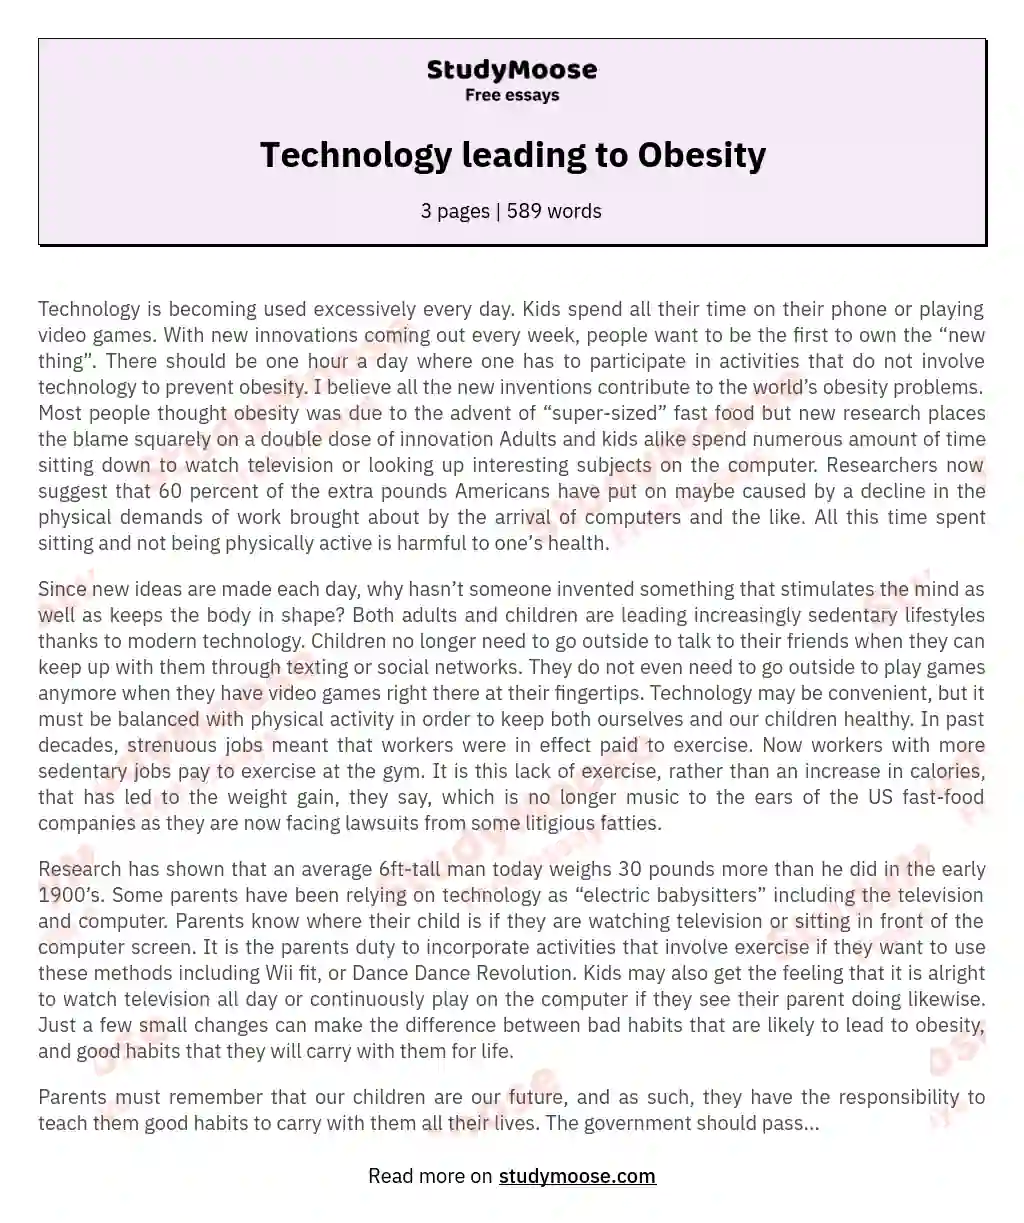 Technology leading to Obesity